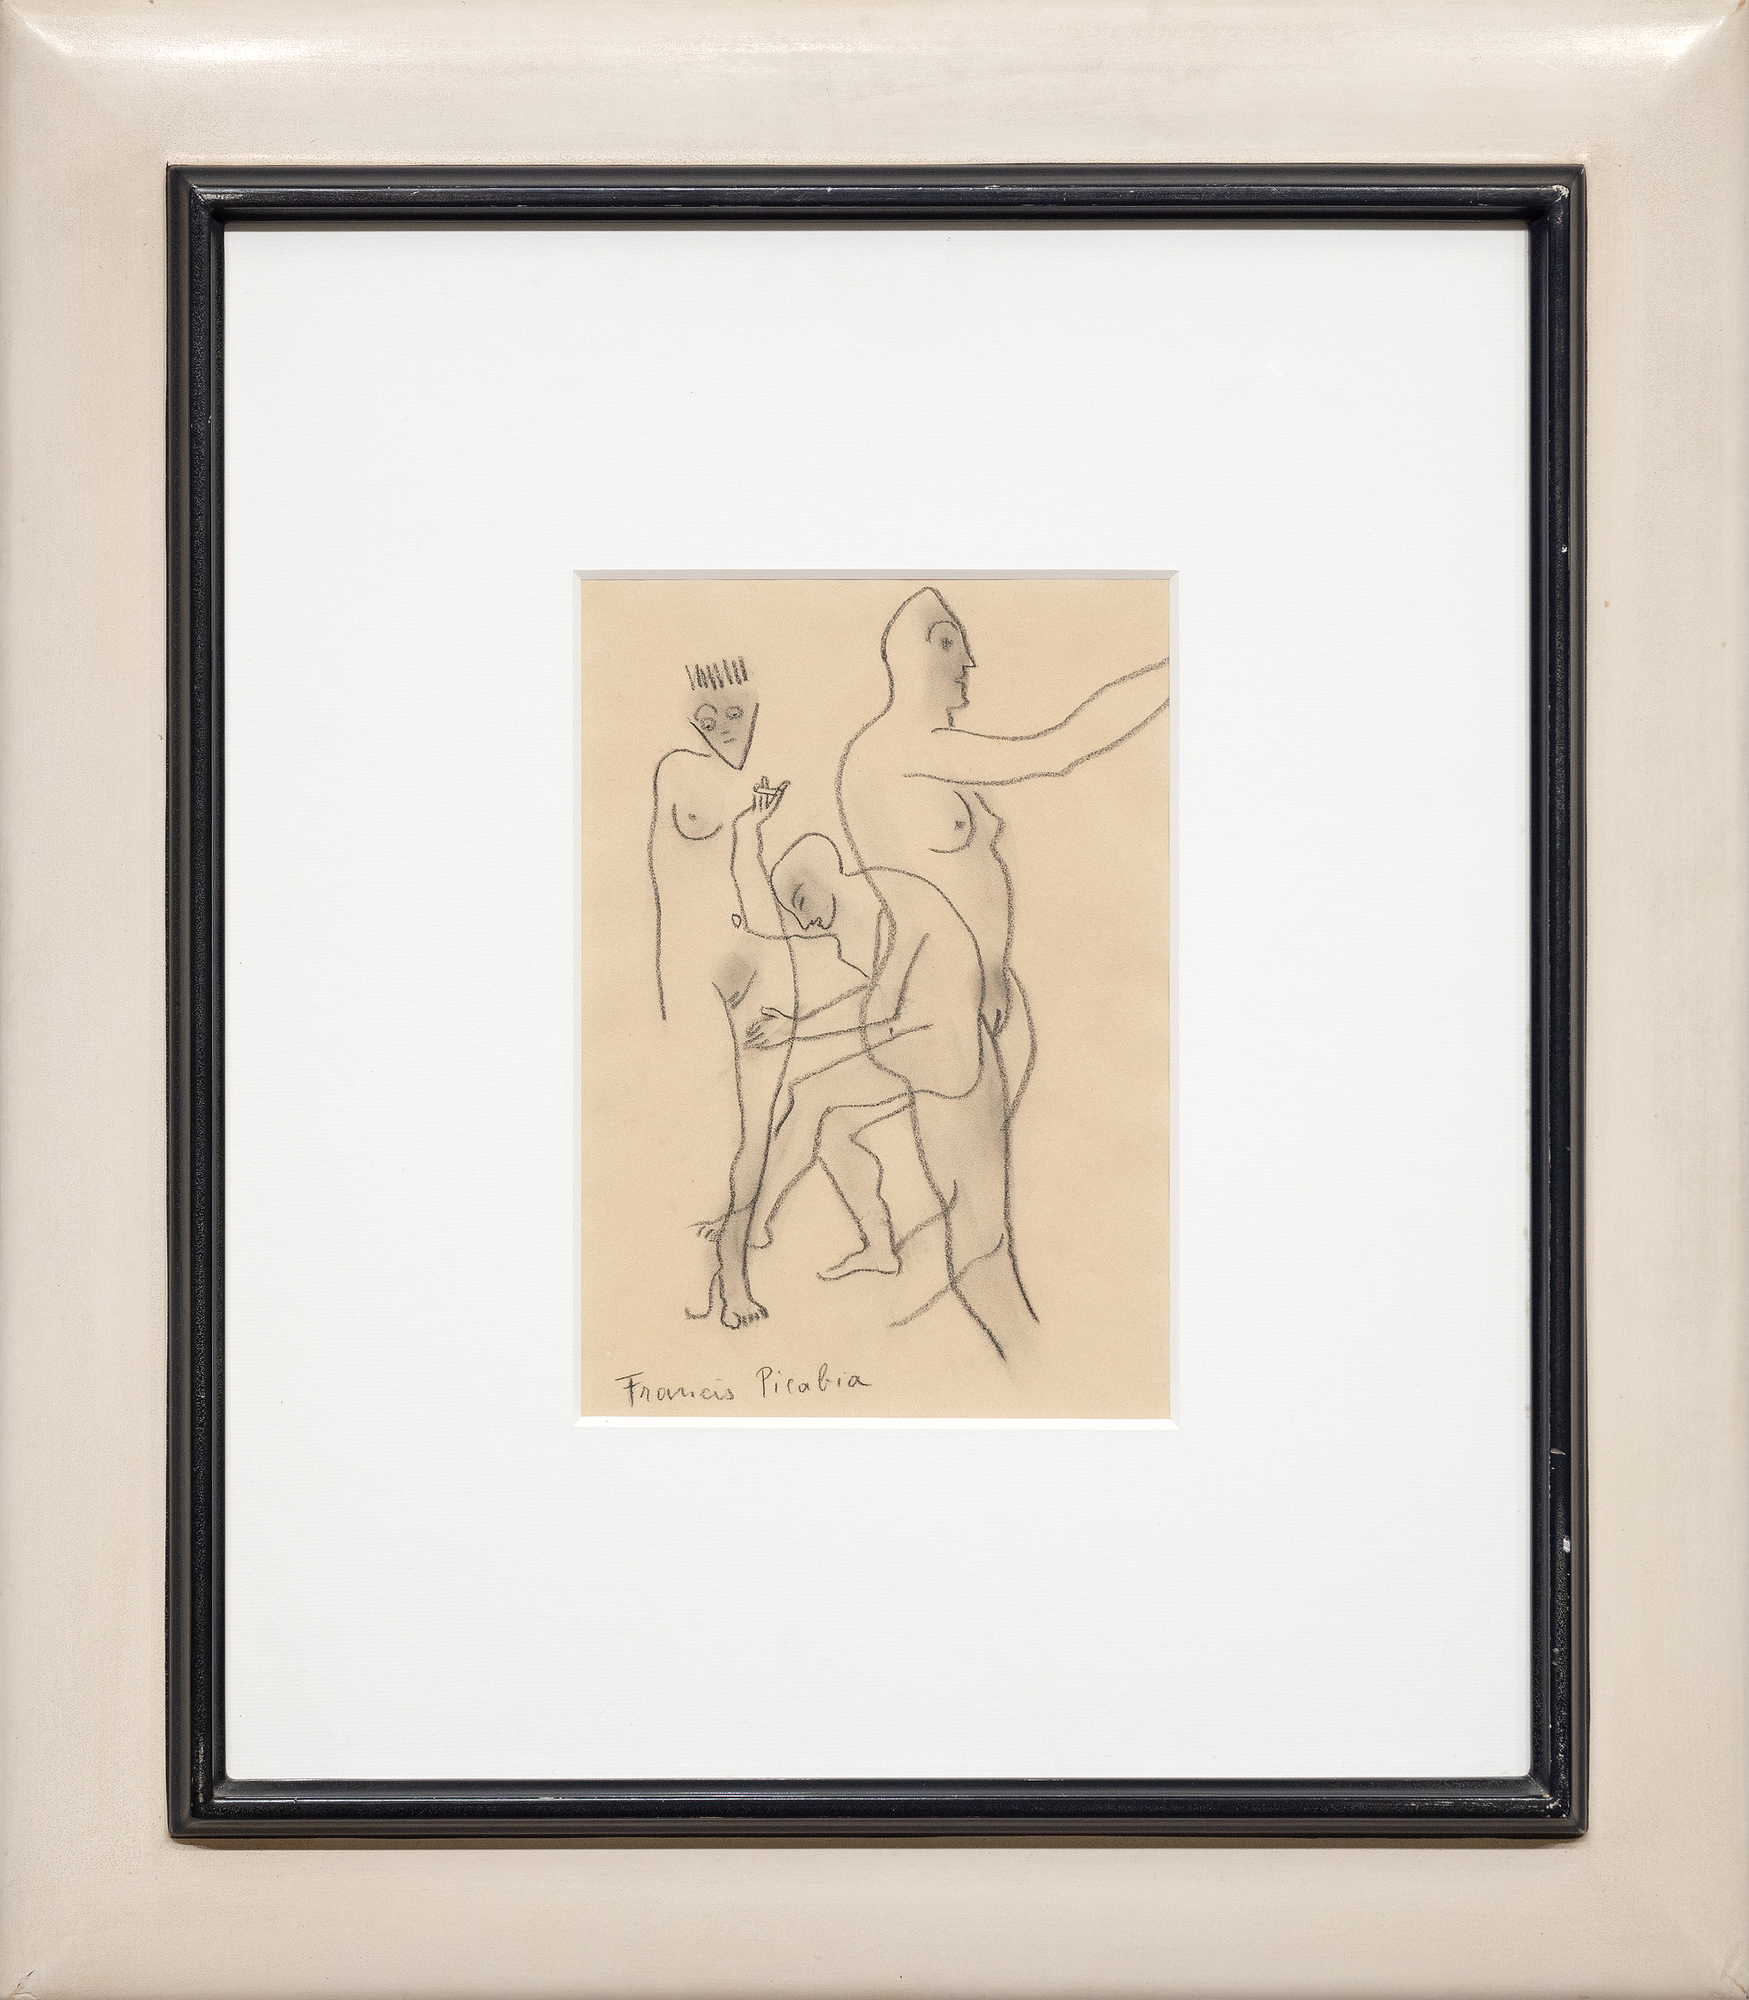 FRANCIS PICABIA - Trois personnages nus - バフ紙に黒のコンテ・クレヨン - 11 1/2 x 8 in.